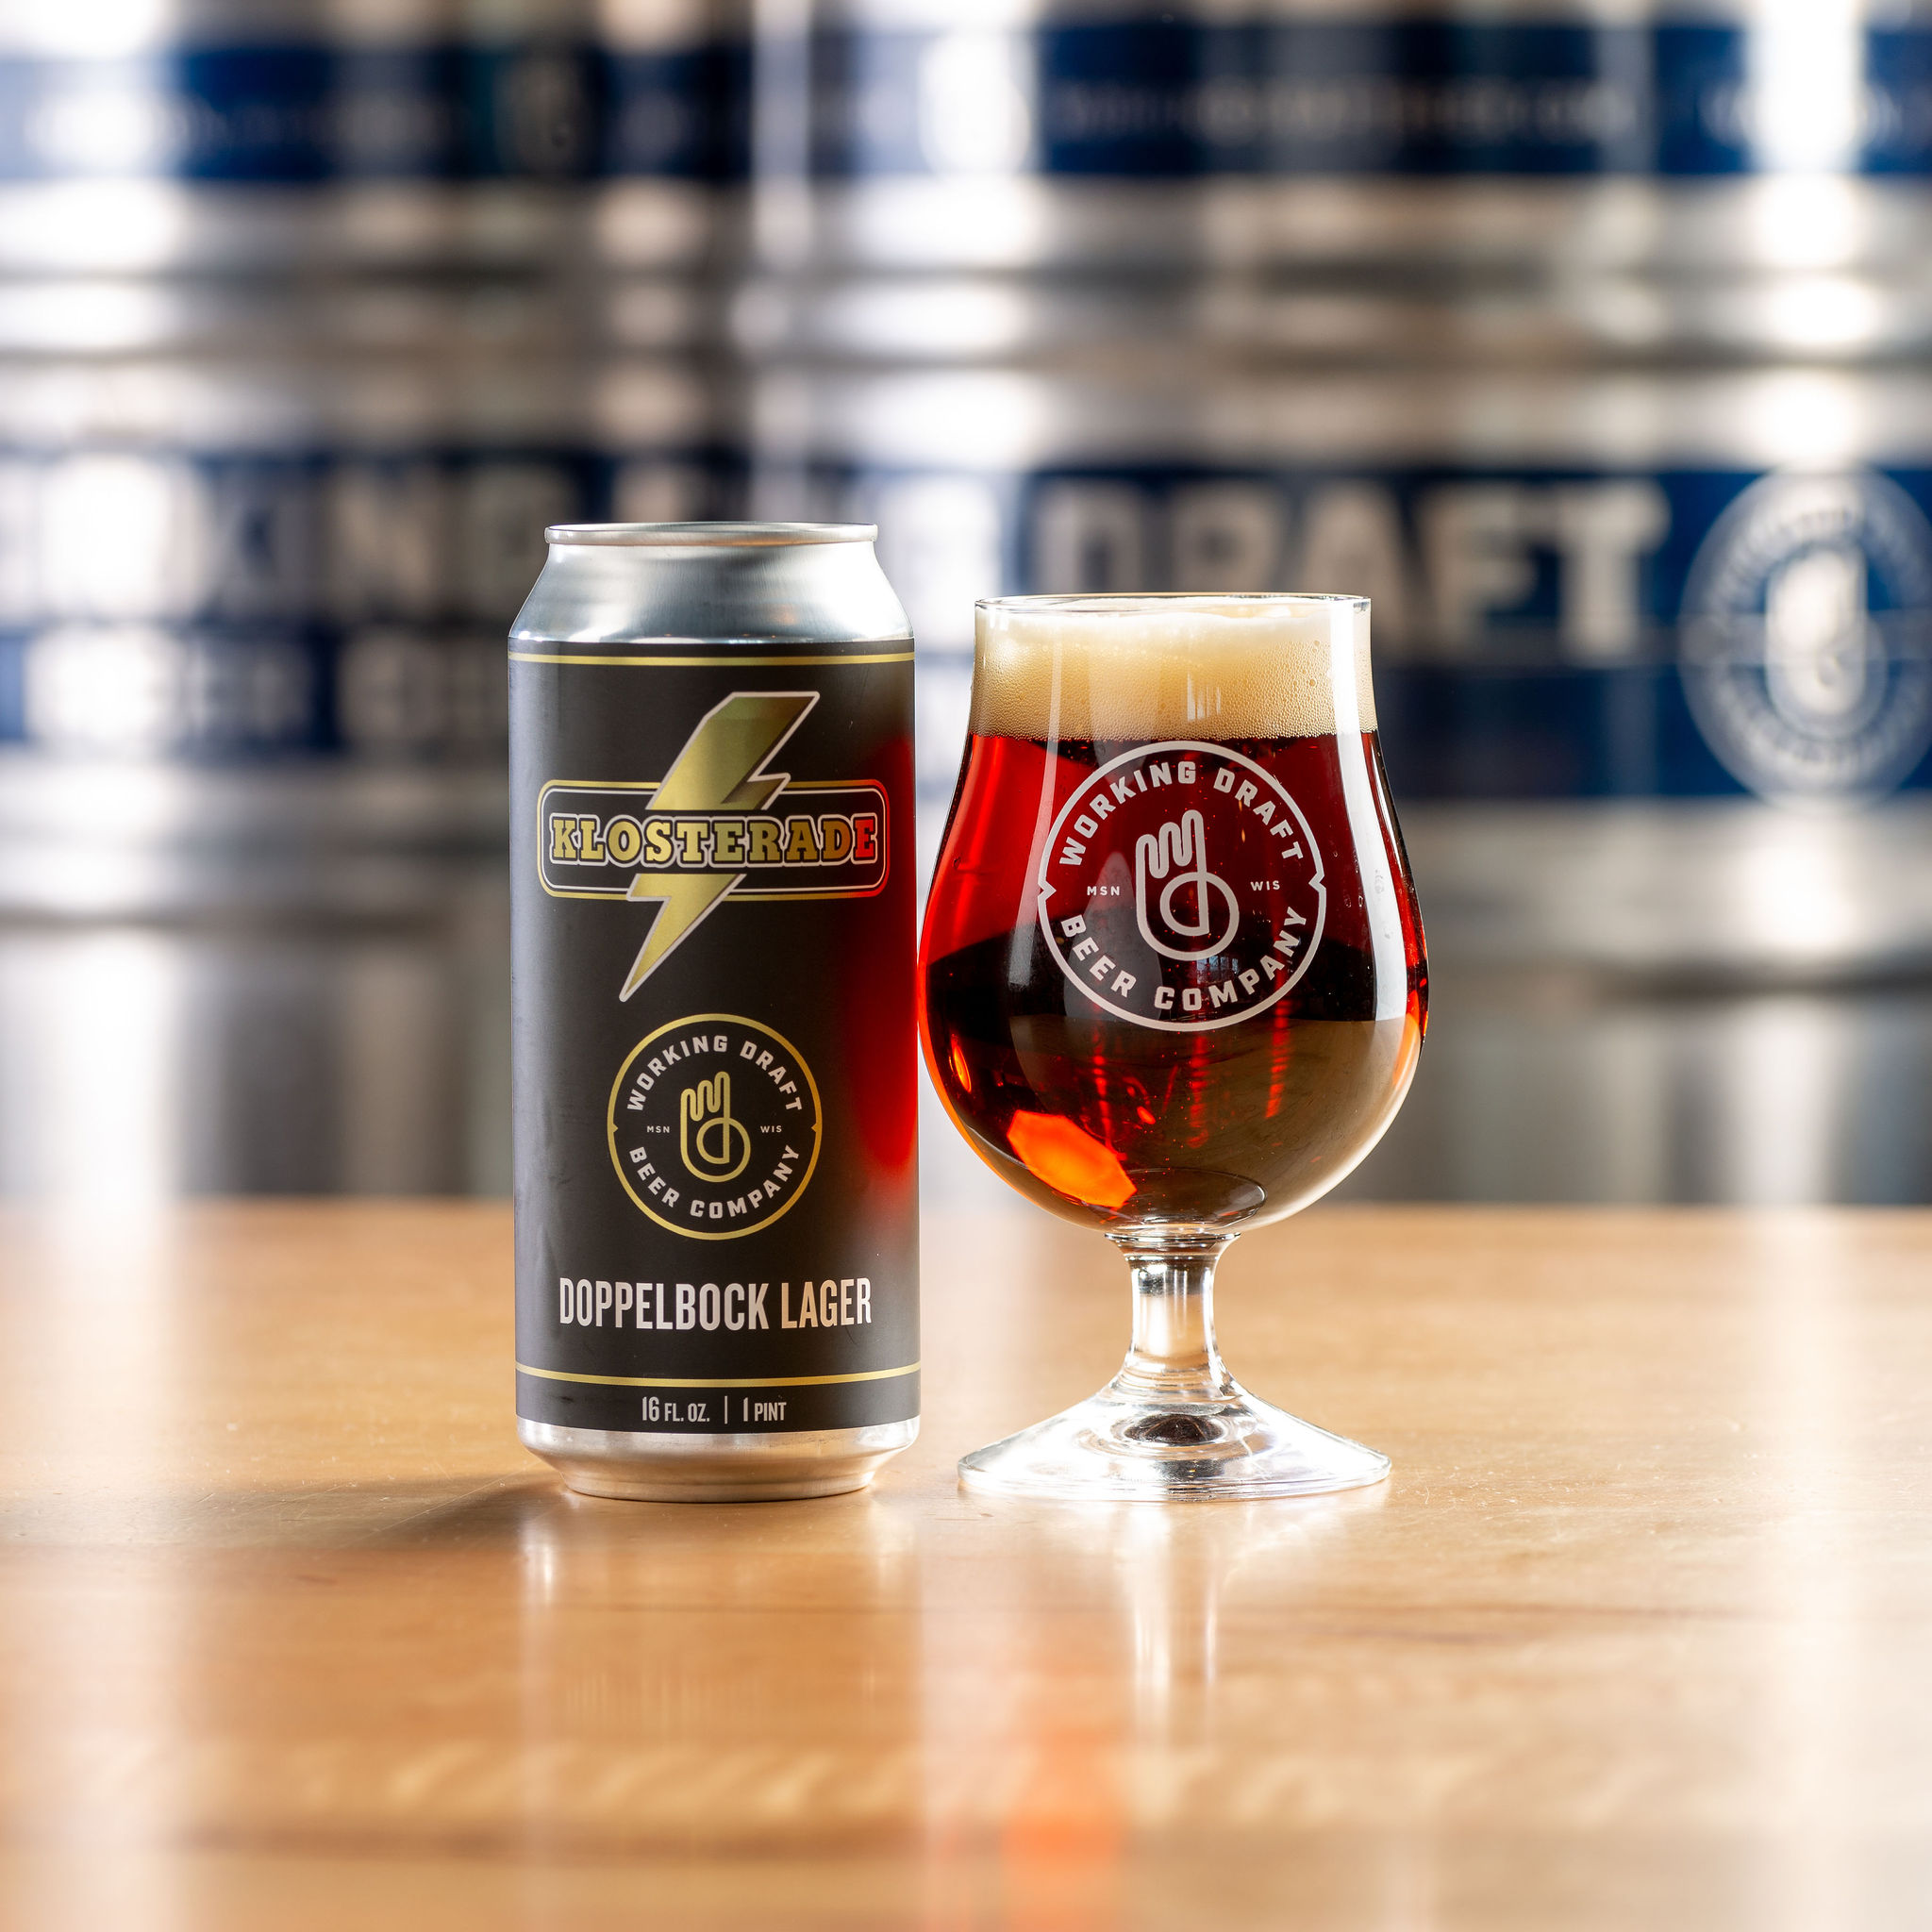 Gold medal winner - Klosterade Doppelbock from Working Draft Beer Company(Photo Credit: Working Draft Beer Company)